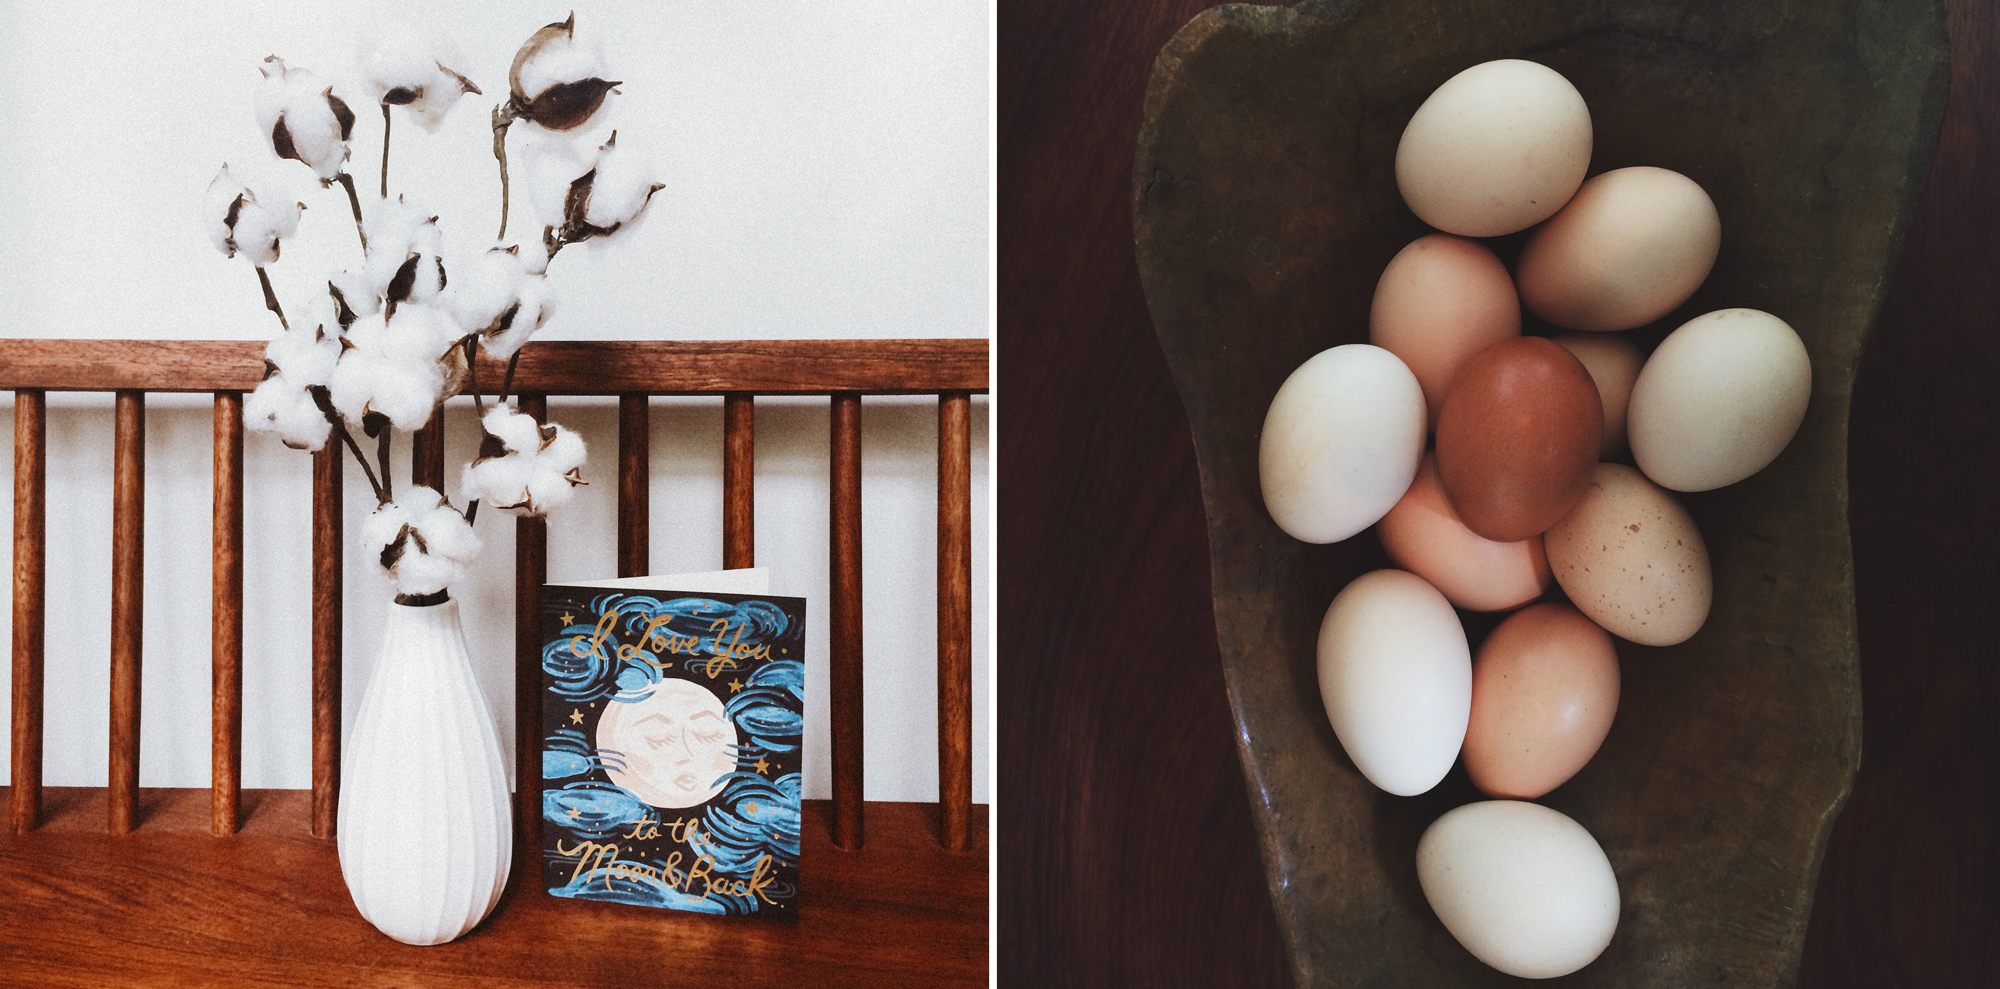 Two years anniversary: cotton bouquet. Also, the dream: having fresh local eggs every morning.